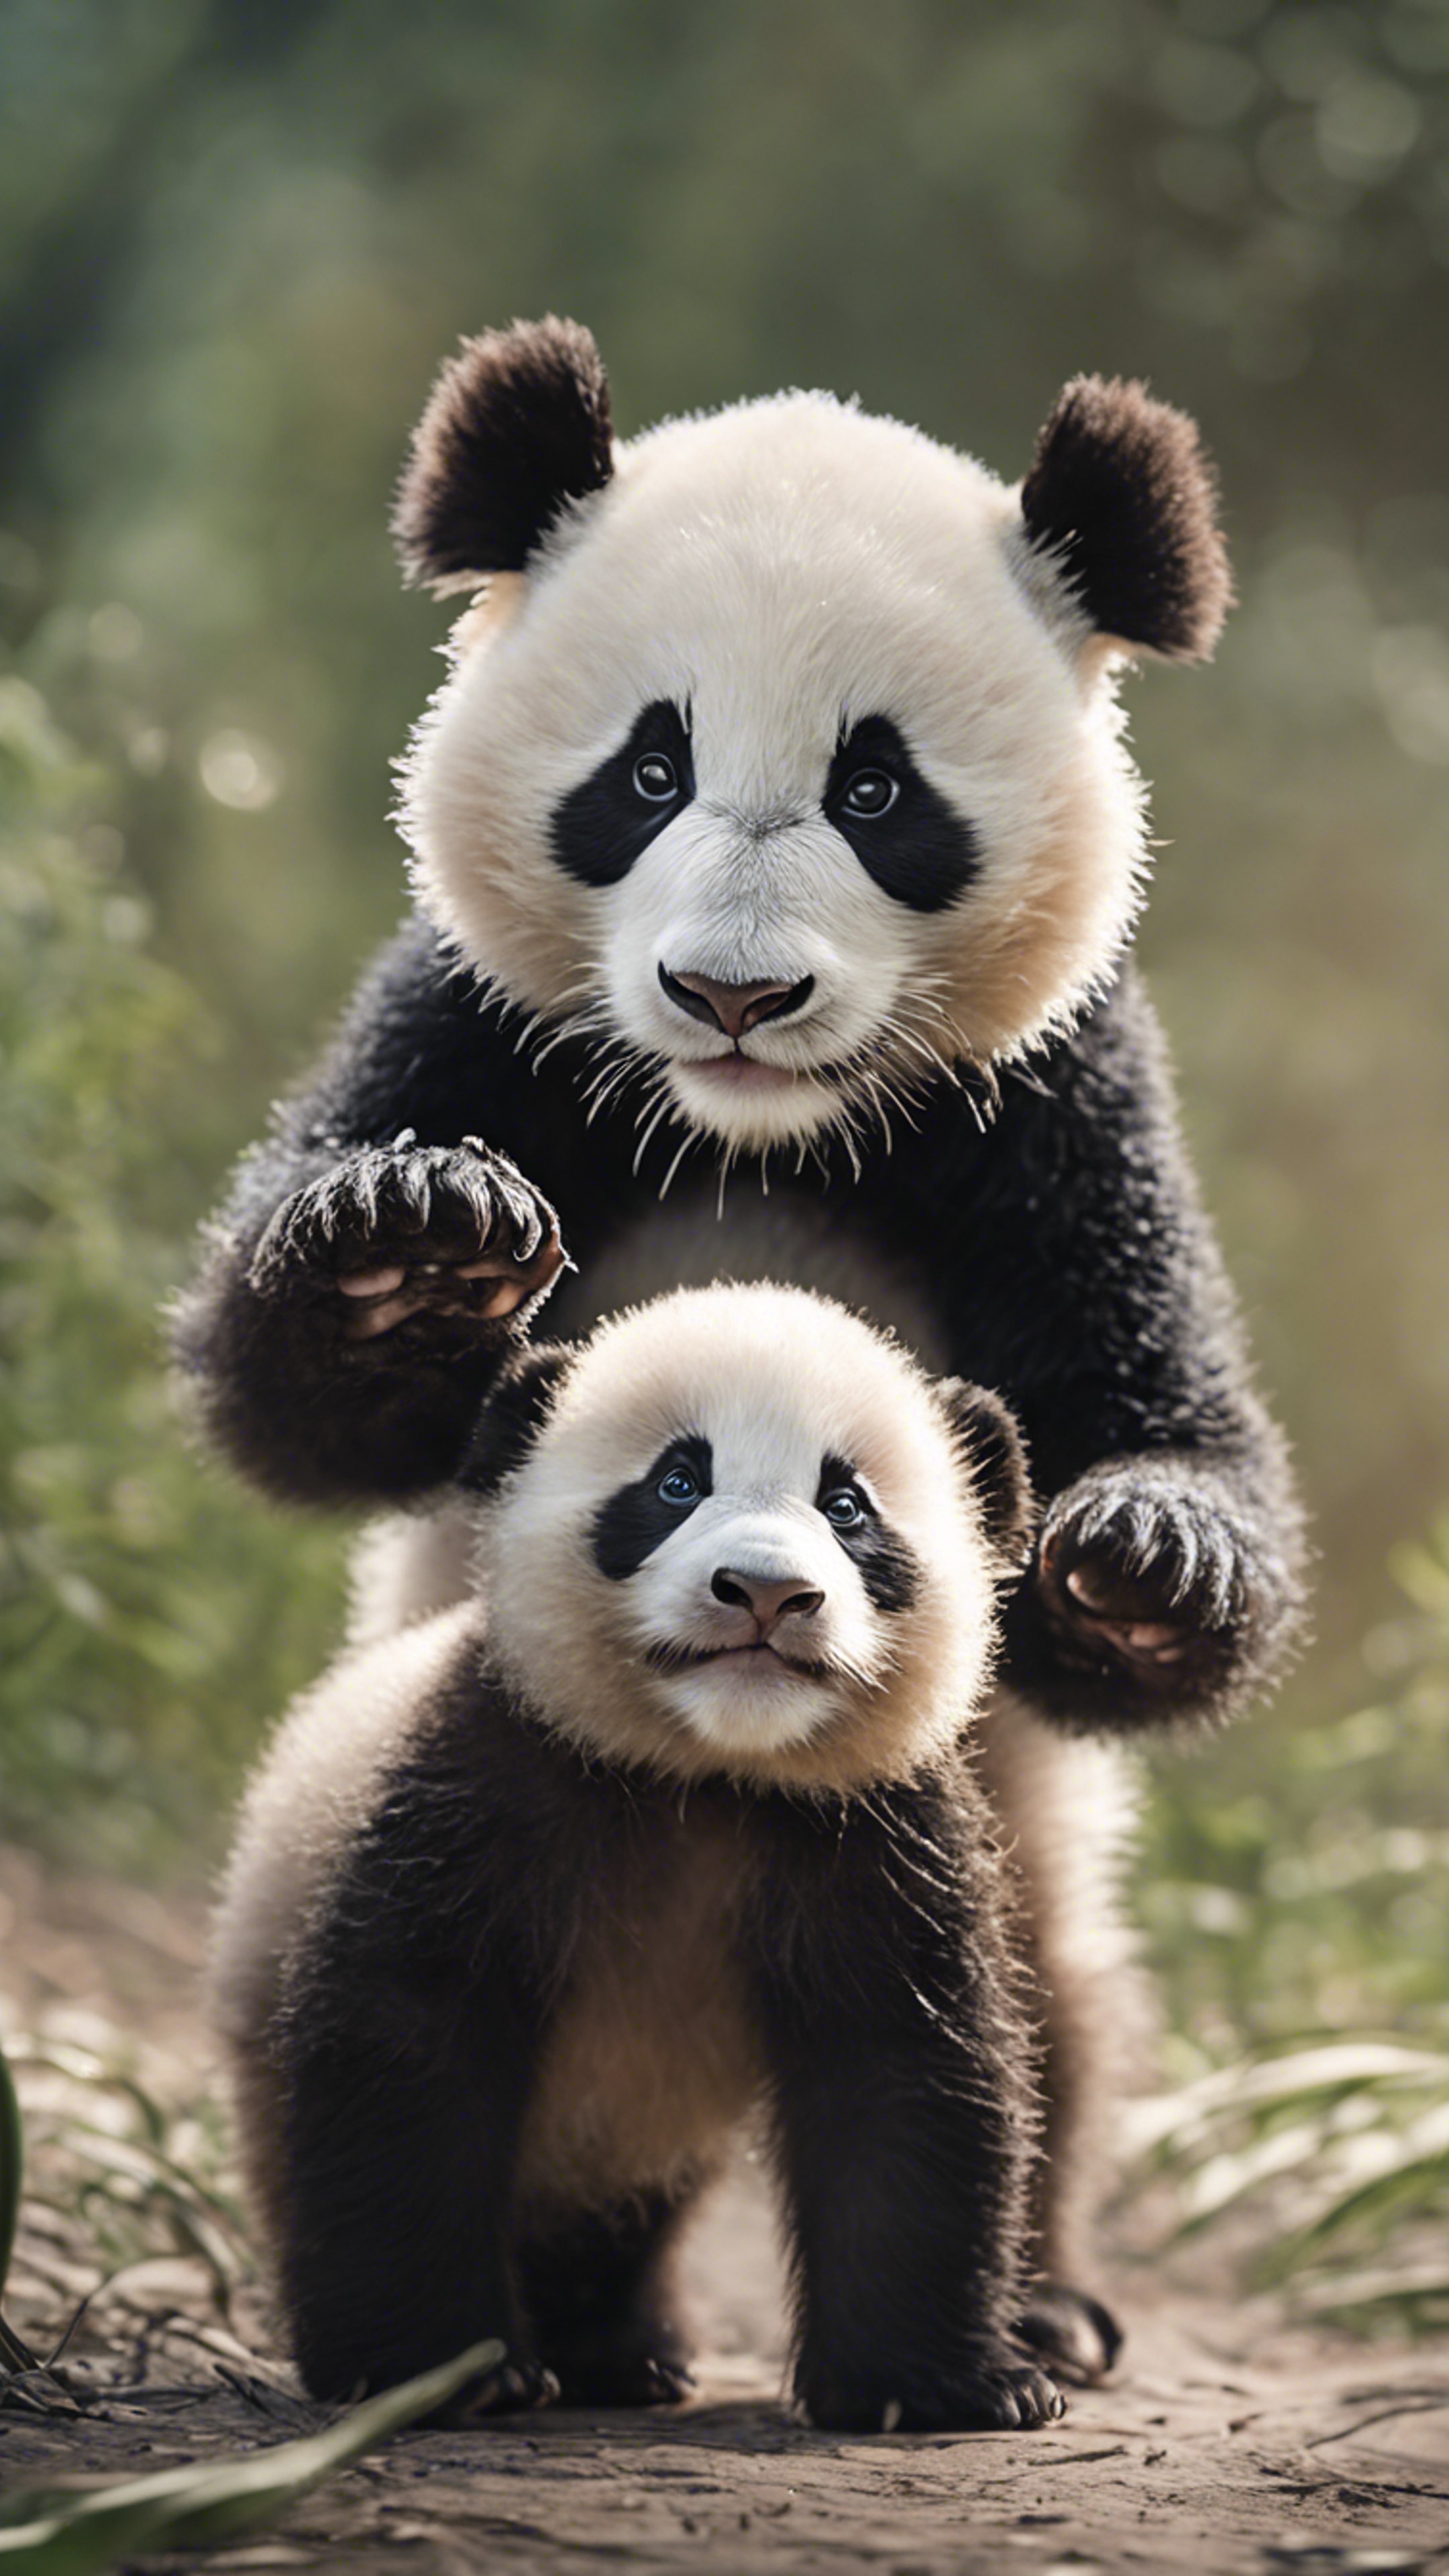 A newborn panda cub learning to walk, under the loving guidance of its mother. Tapeta[d326db7fc4d14111aedf]